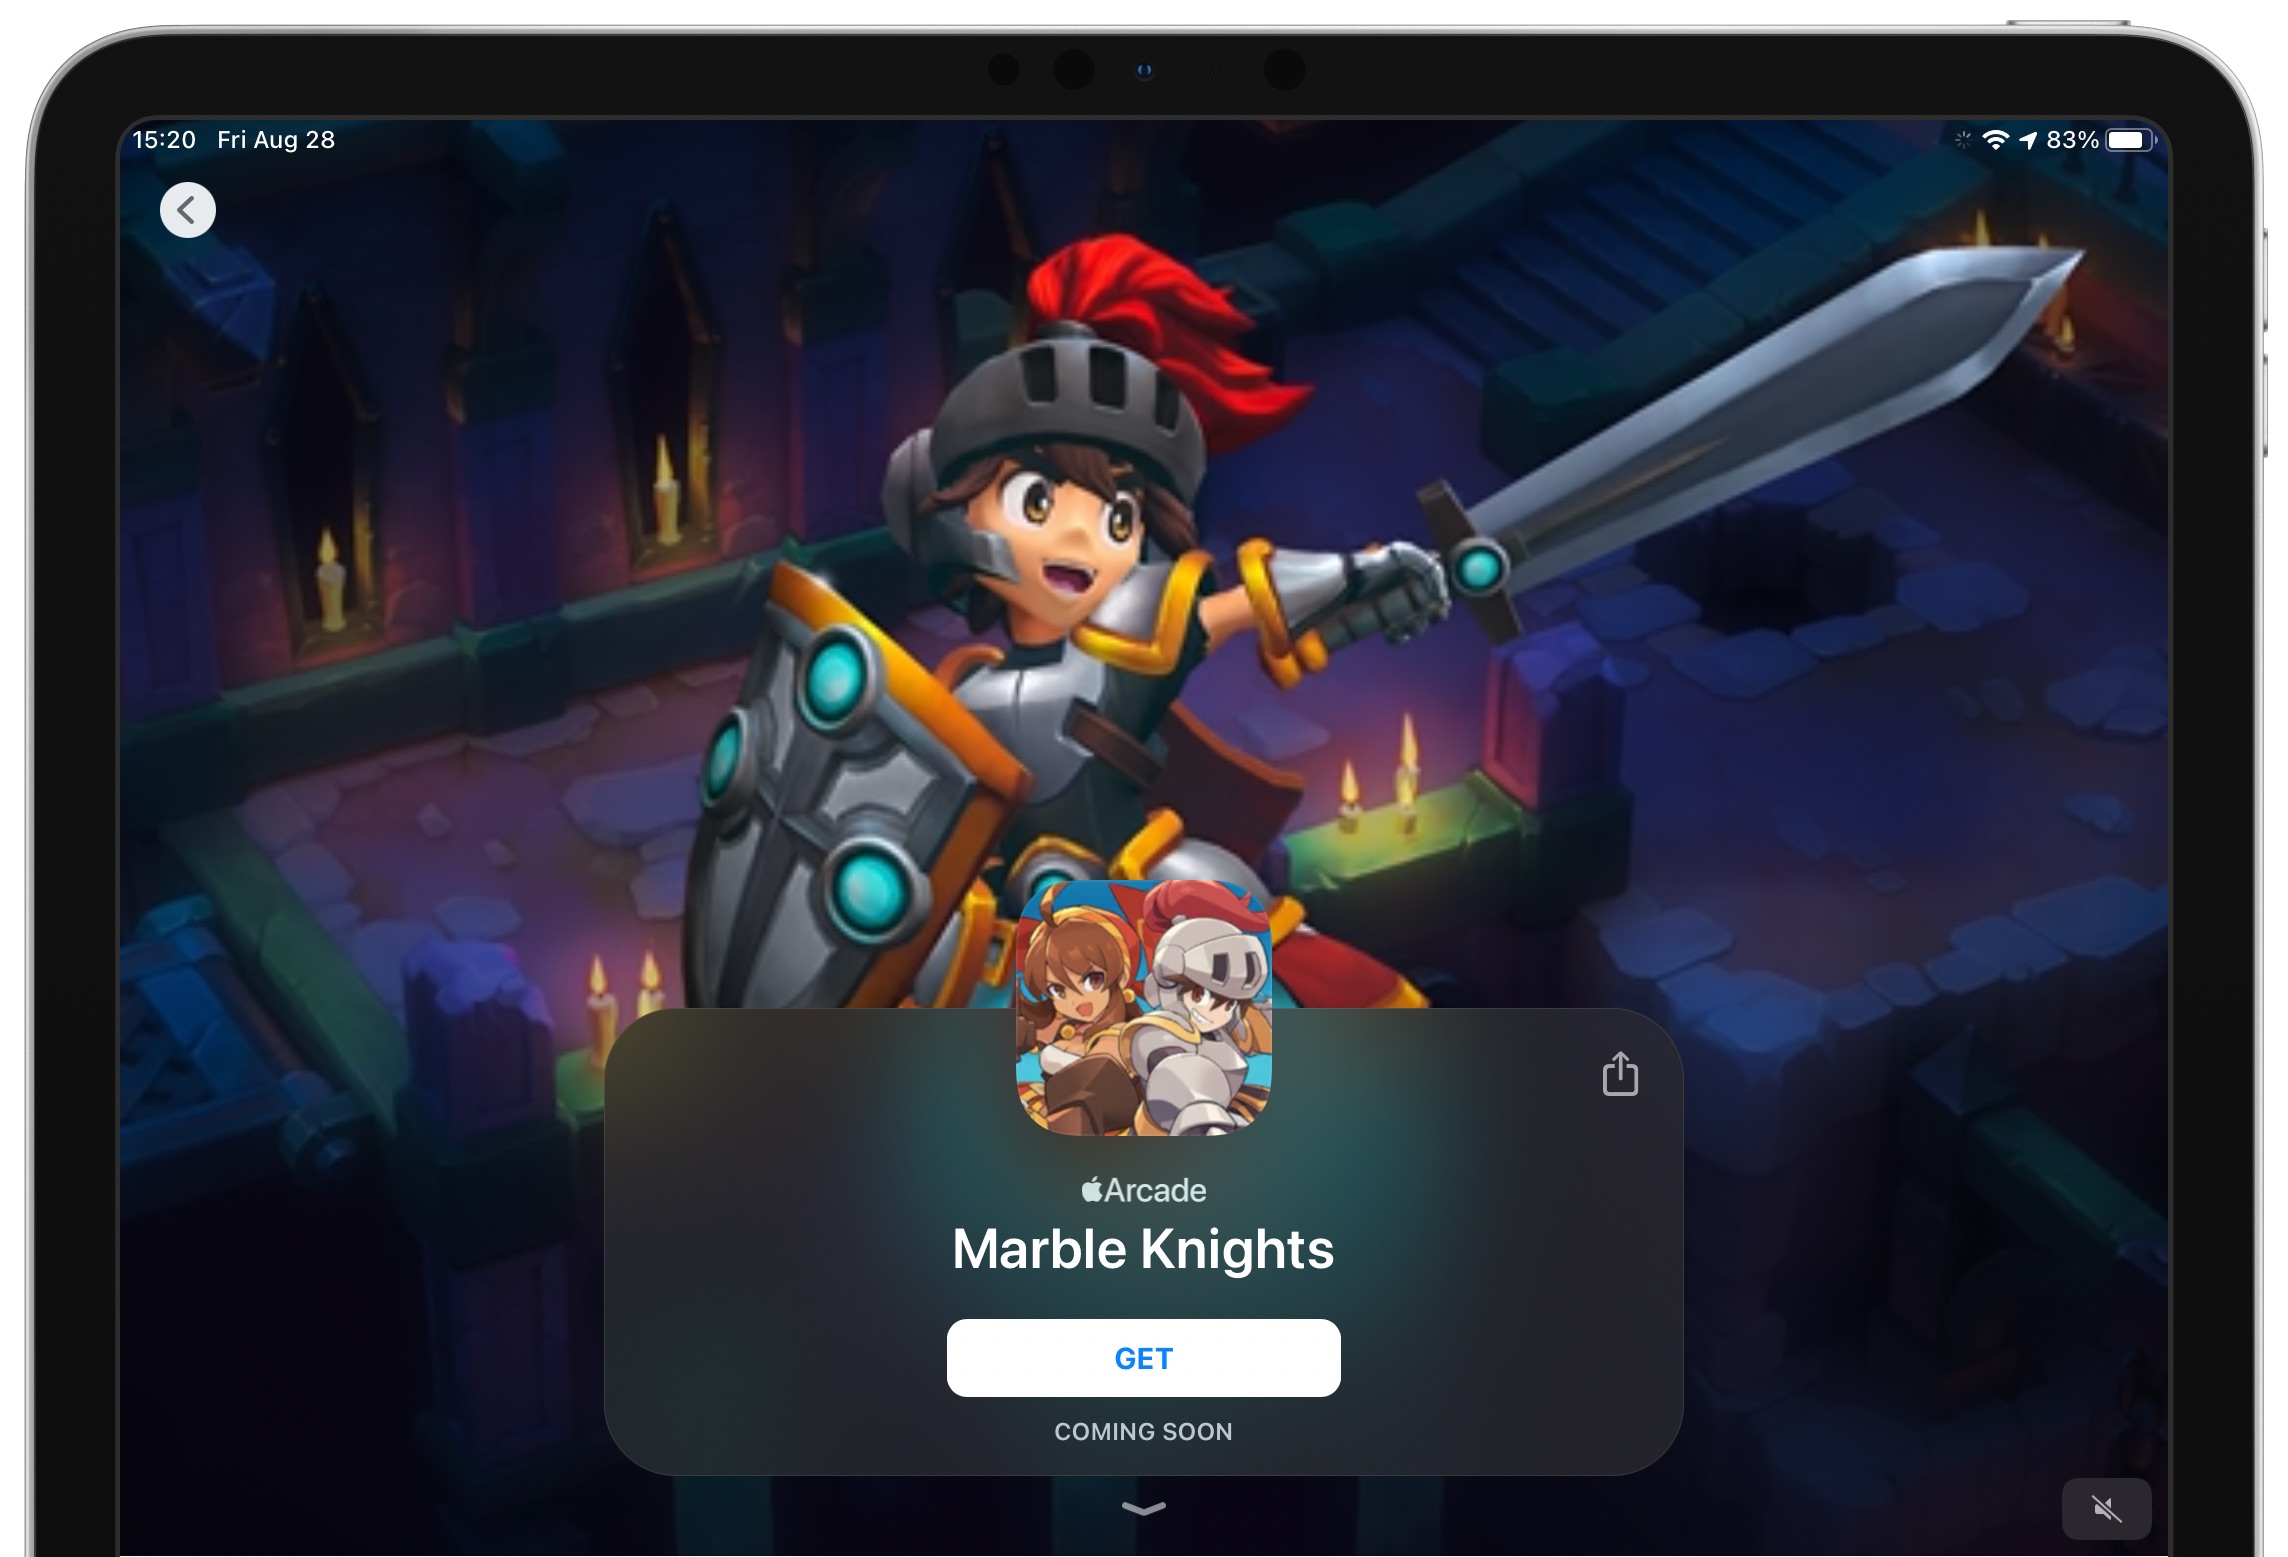 Sword-swinging fantasy meets marble mania in “Marble Knights,” due soon on Apple Arcade